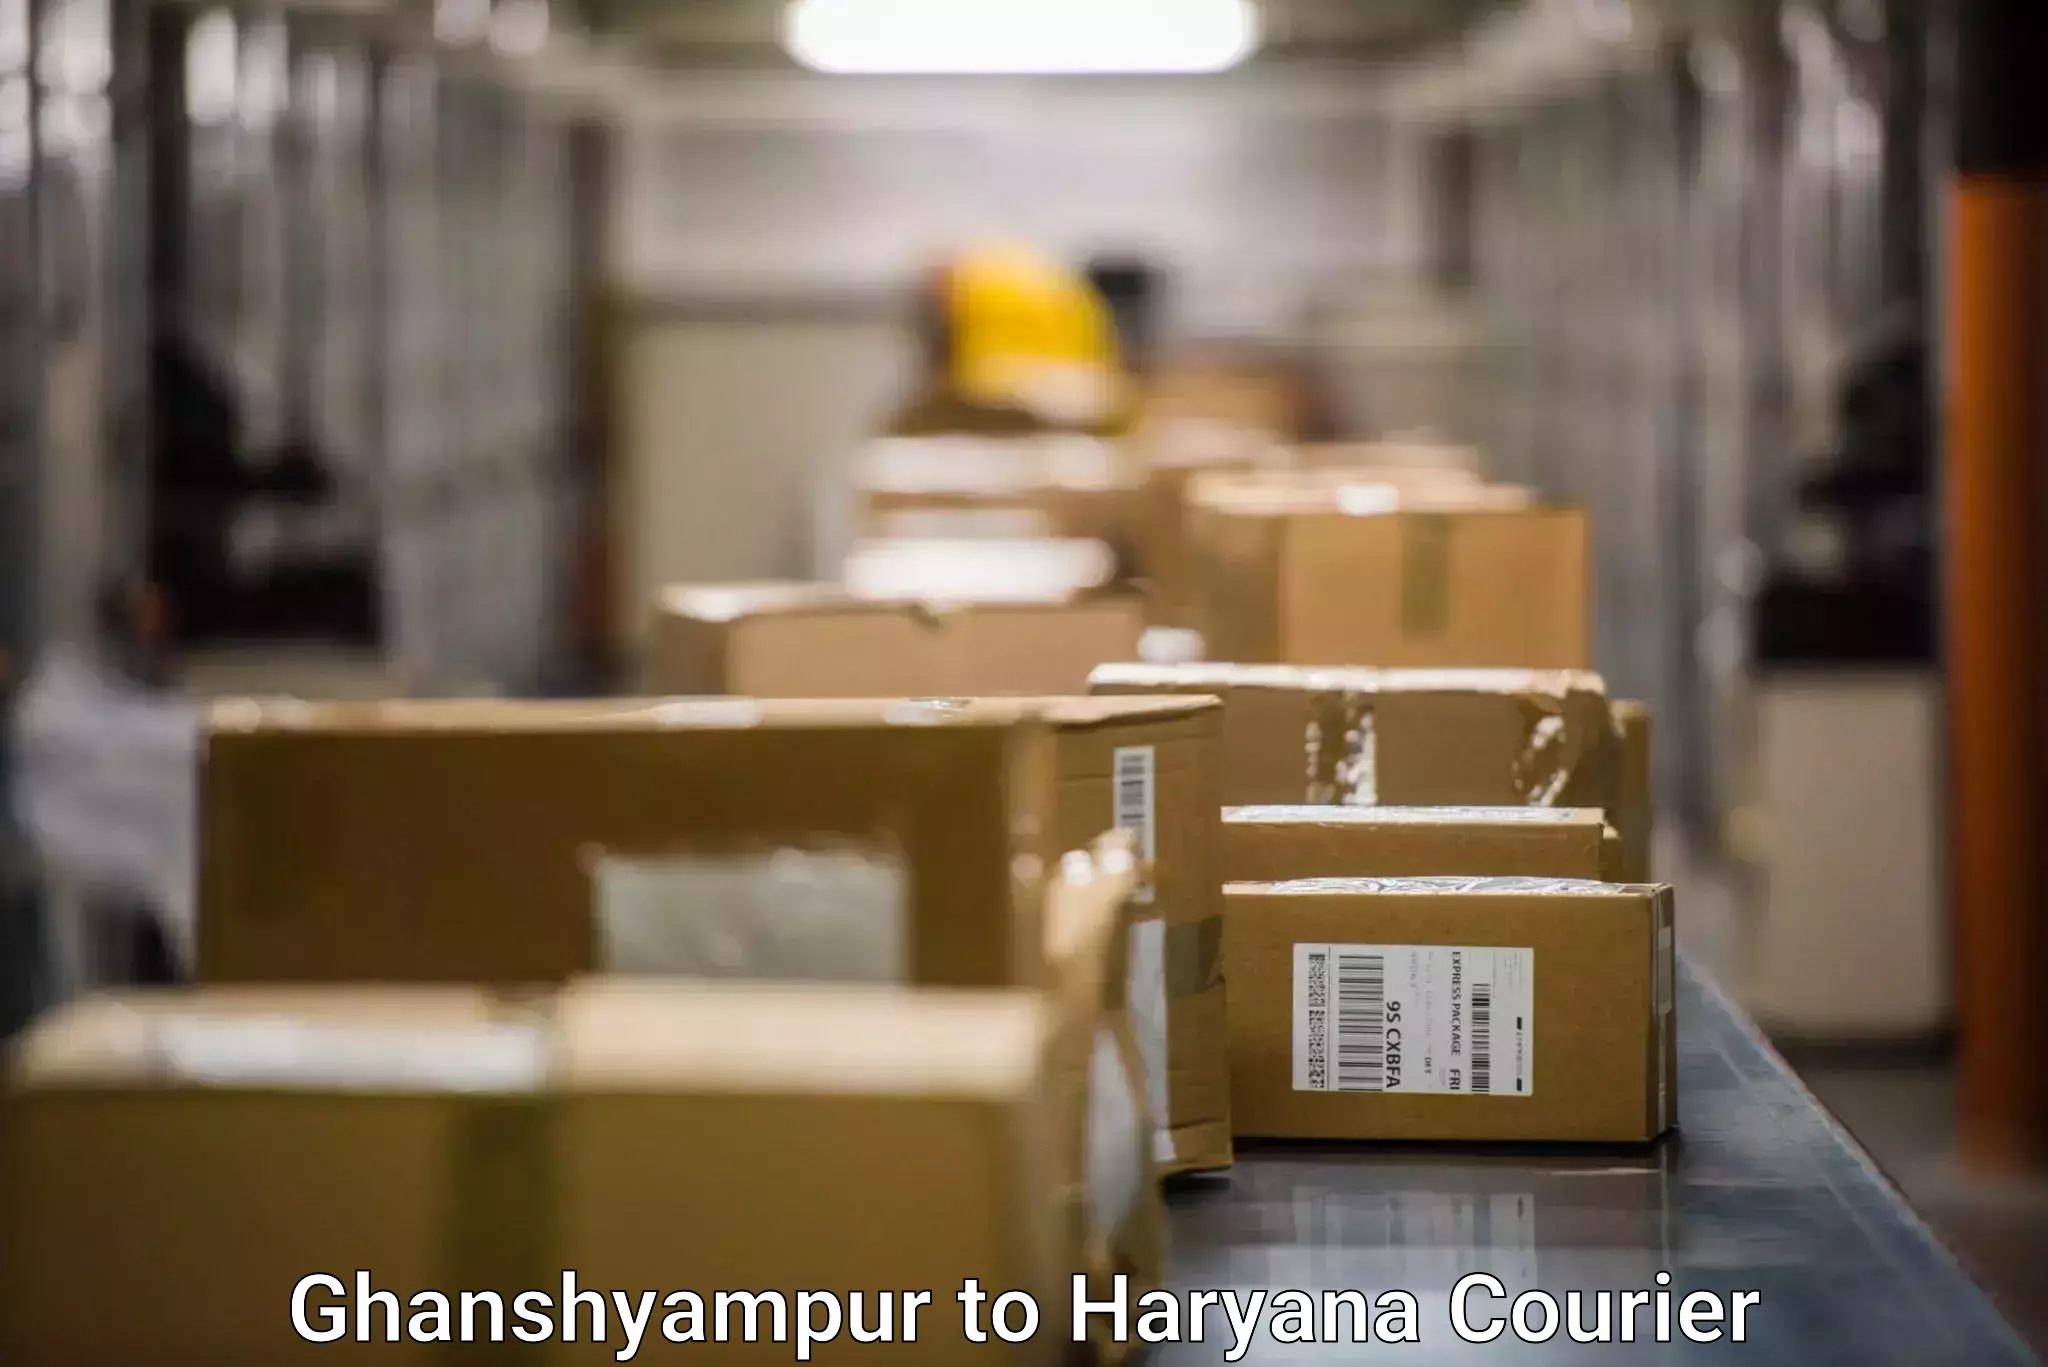 Integrated shipping services Ghanshyampur to NCR Haryana